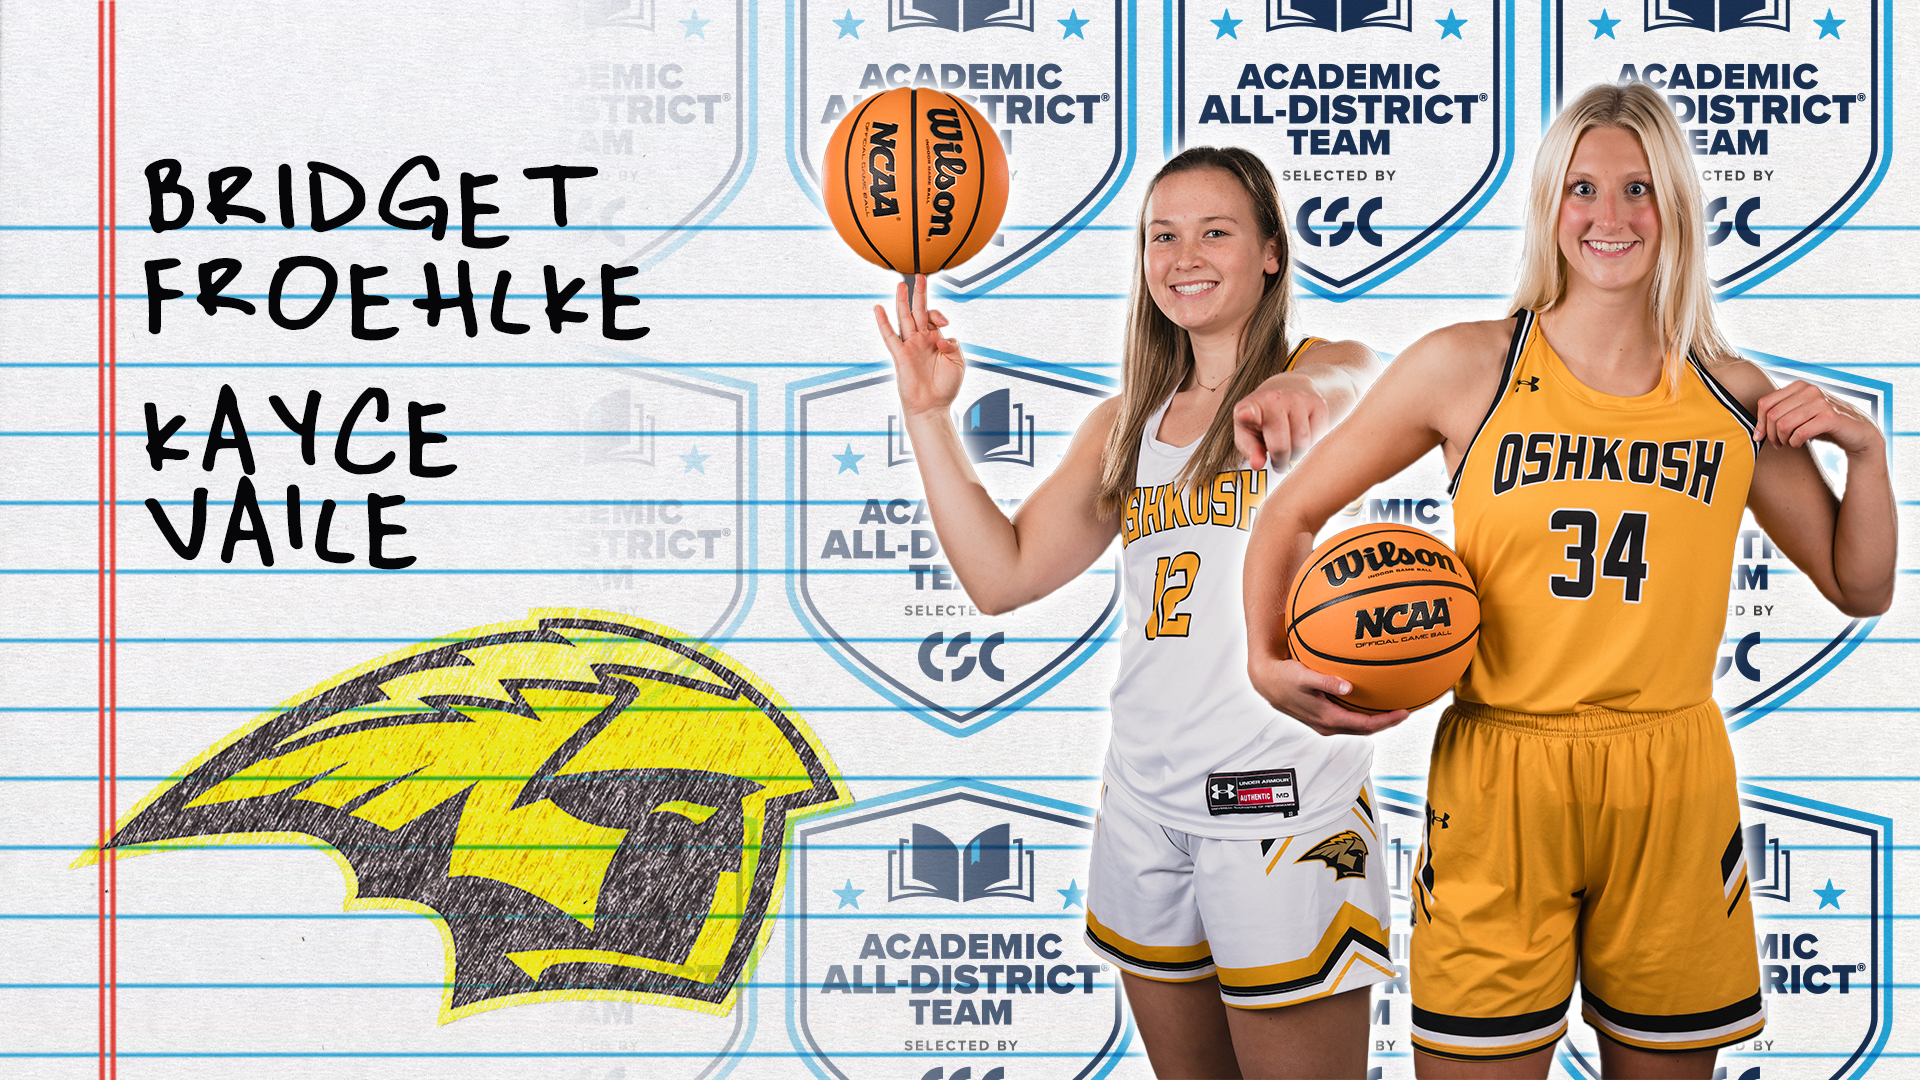 Froehlke, Vaile Named CSC Academic All-District